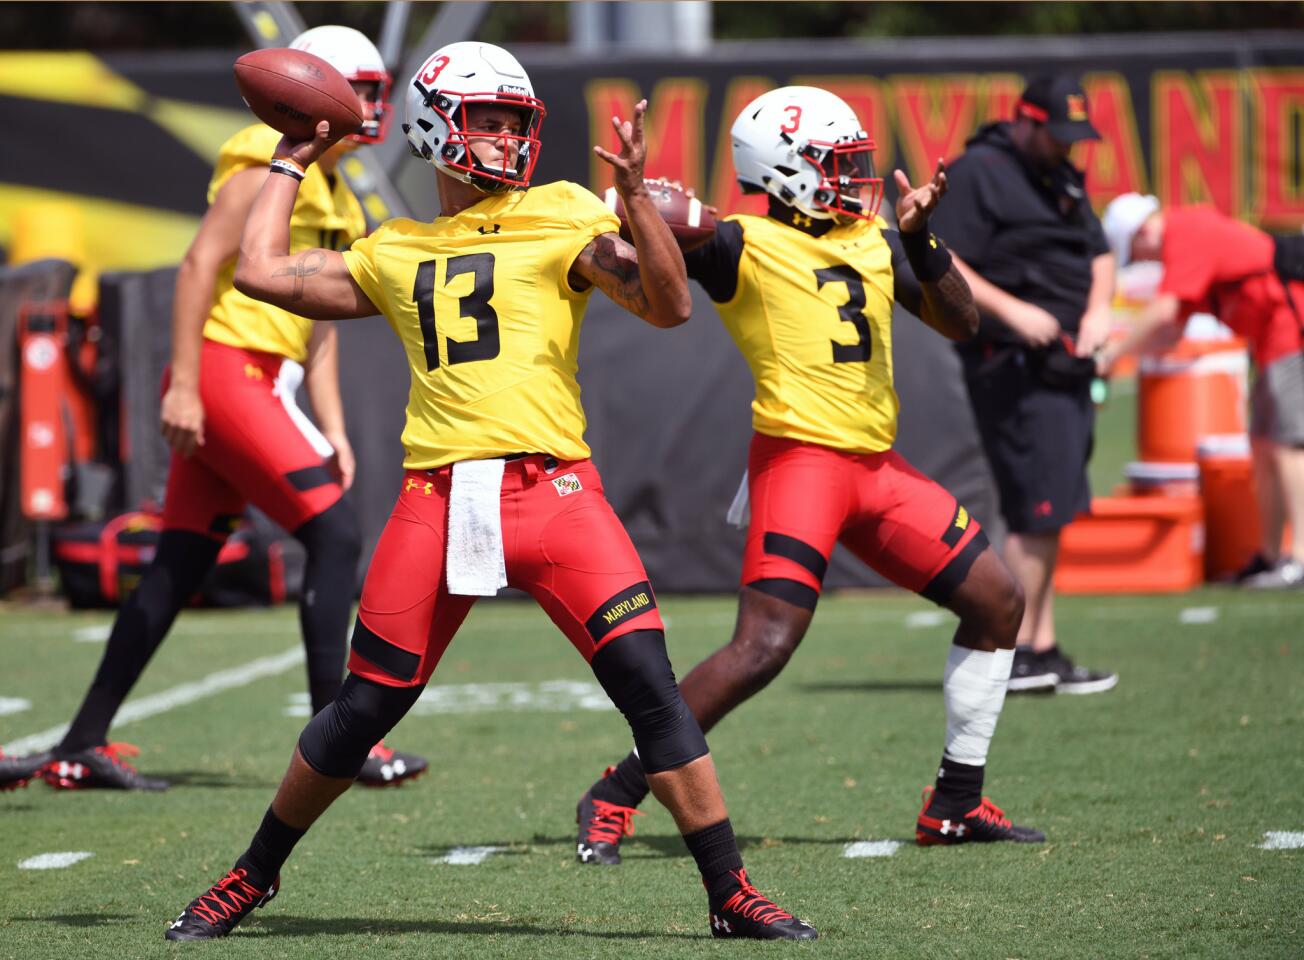 From left, Tyler DeSue and Tyrell Pigrome, University of Maryland QBs, during a passing drill during training camp on media day.